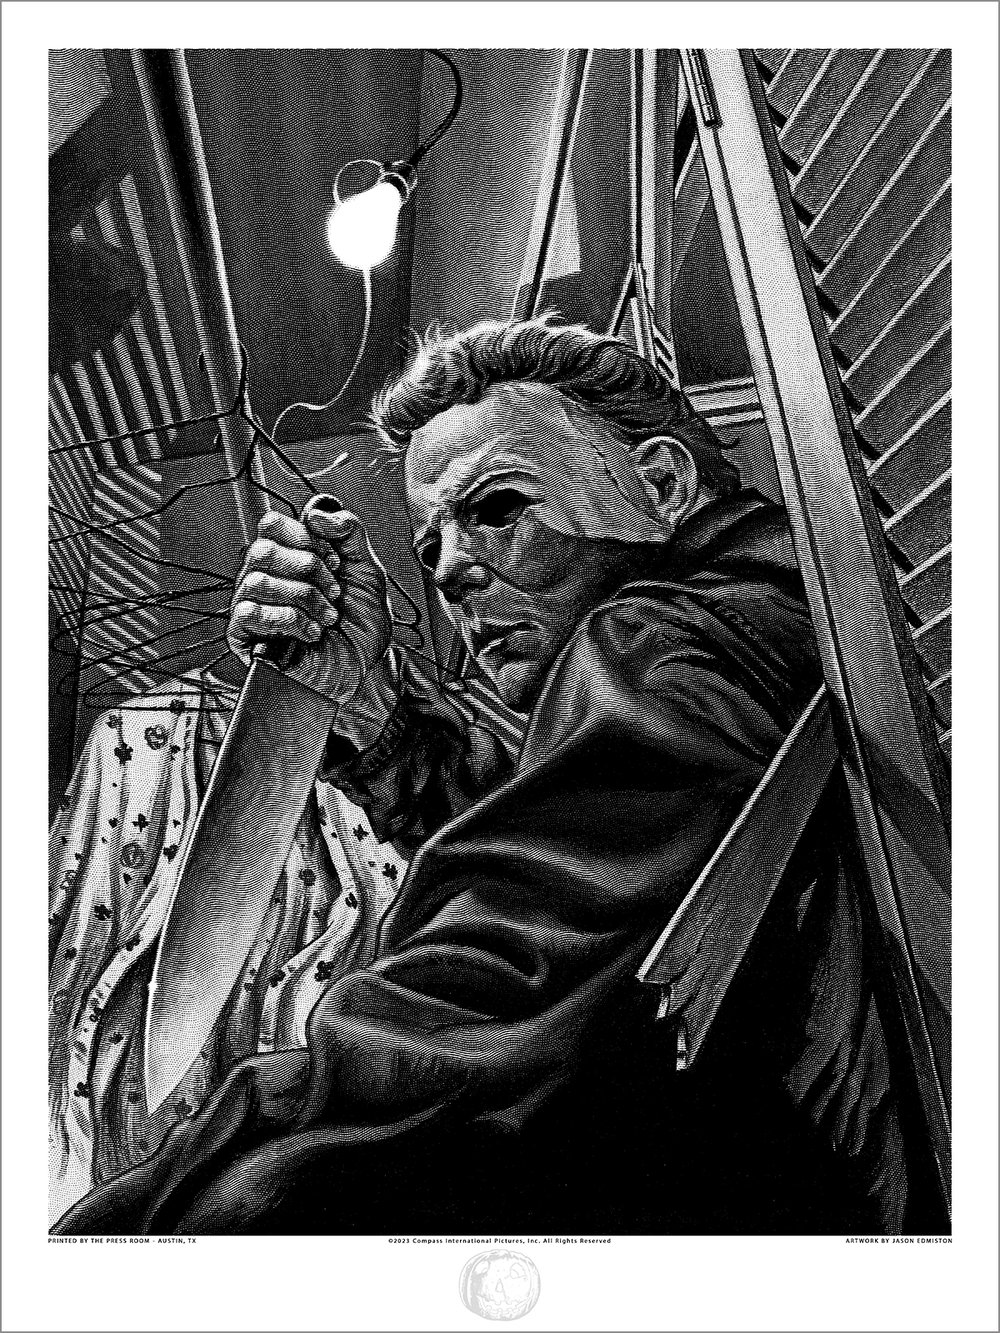 "Michael Myers Closet Attack" - 18" x 24" printers proof letterpress with embossed stamp